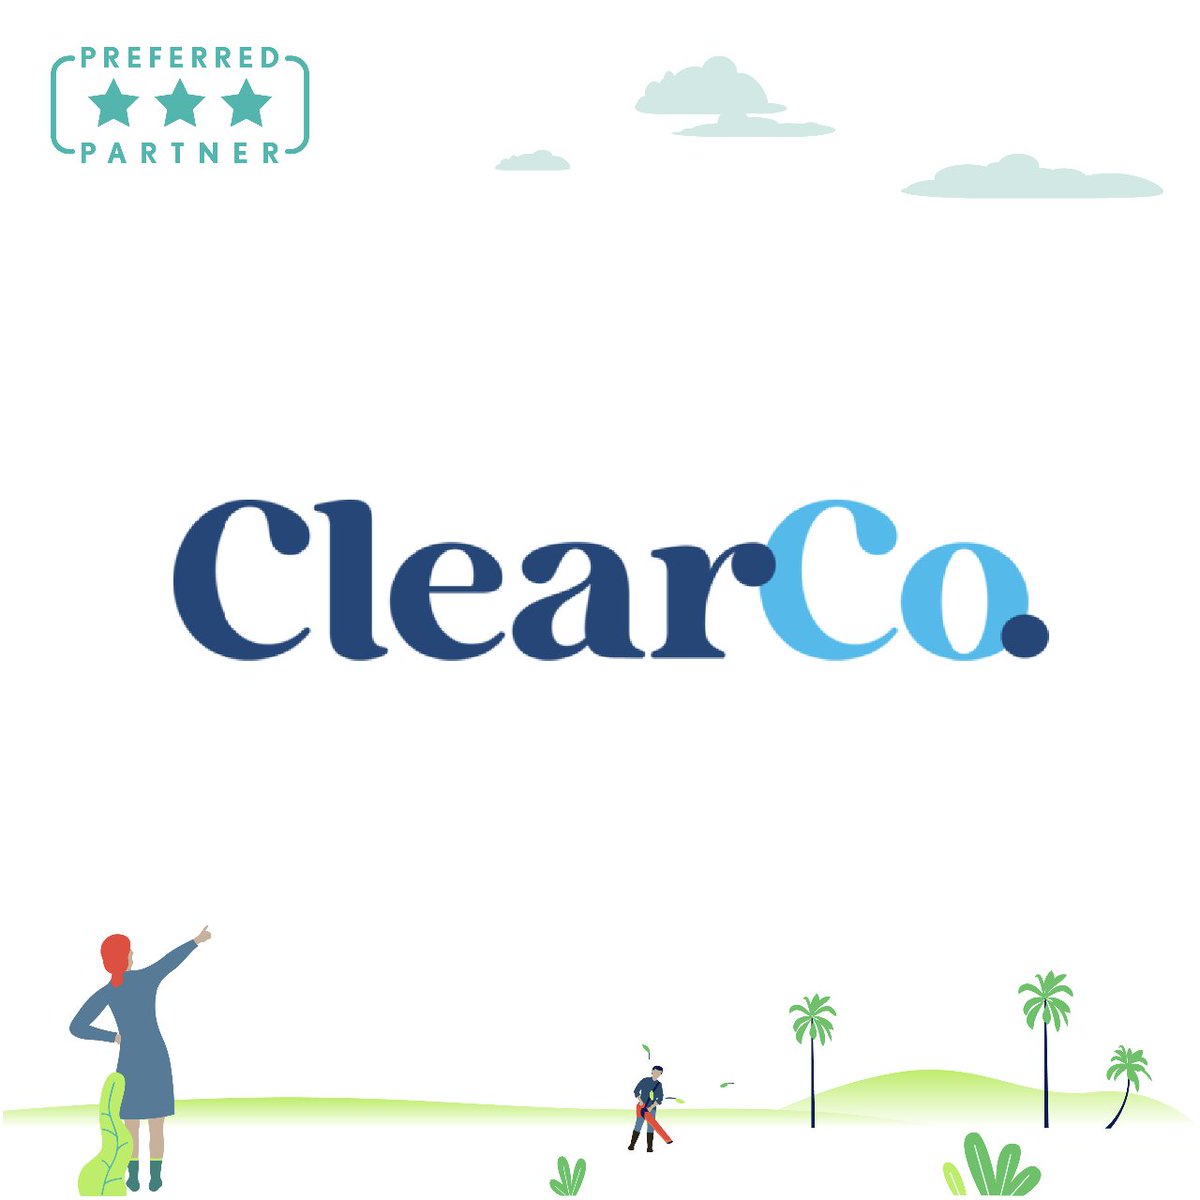 We are proud to integrate with @ClearCompany, one of our preferred partners.

#TechTuesday #Technology #Integrated #Innovation #Partnerships #GettingThingsDone #Programming #ATSsoftware #Recruiting #TalentAcquisition #Hiring